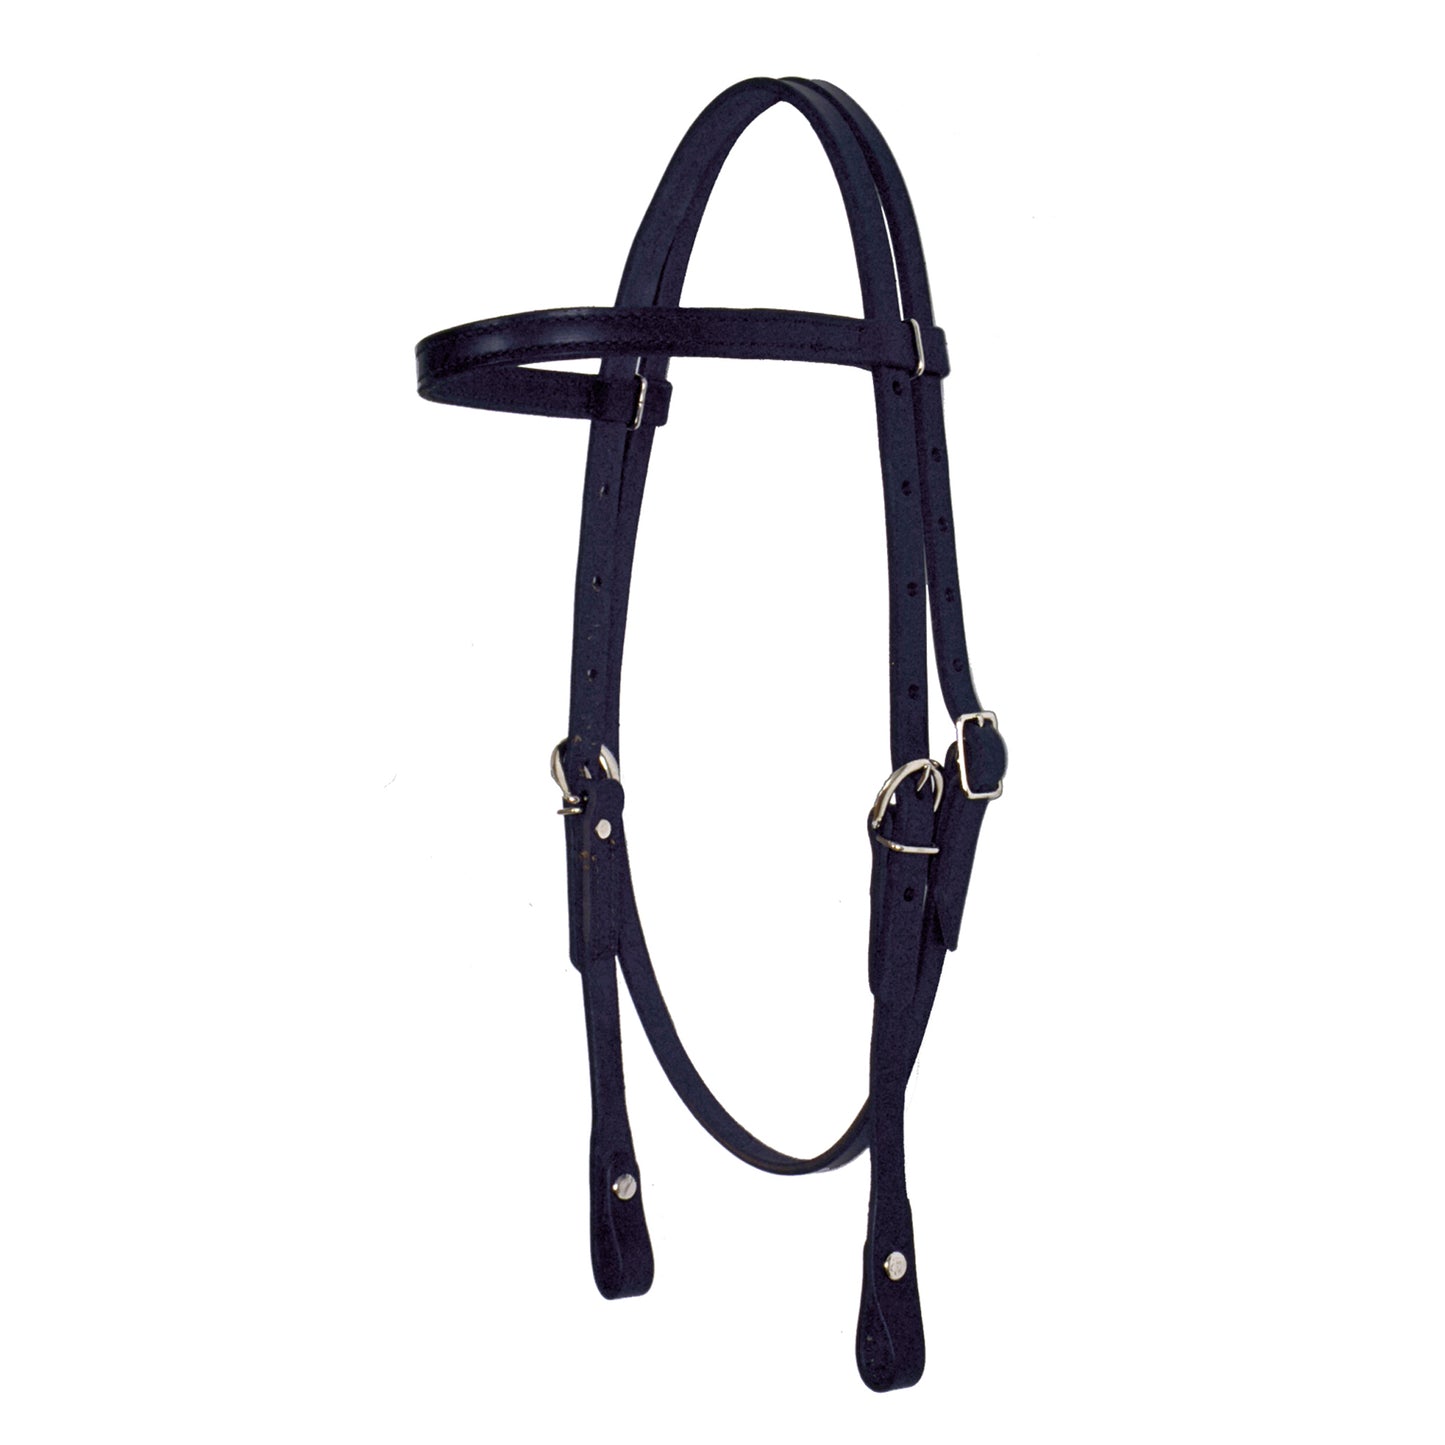 5/8" Leather Browband Headstall